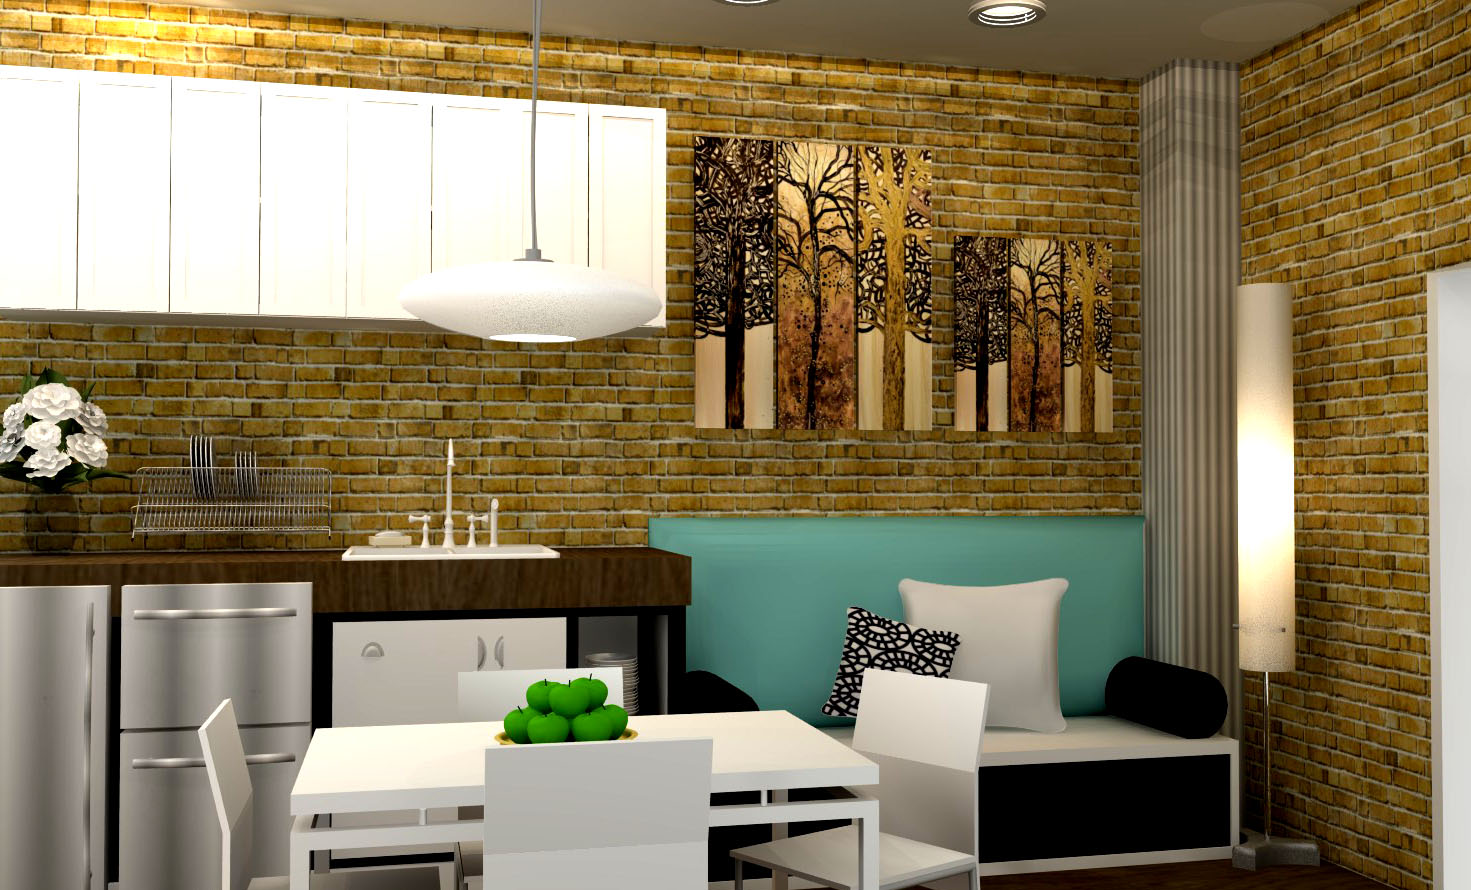 Gabby's Designs: Commercial I Project1471 x 890